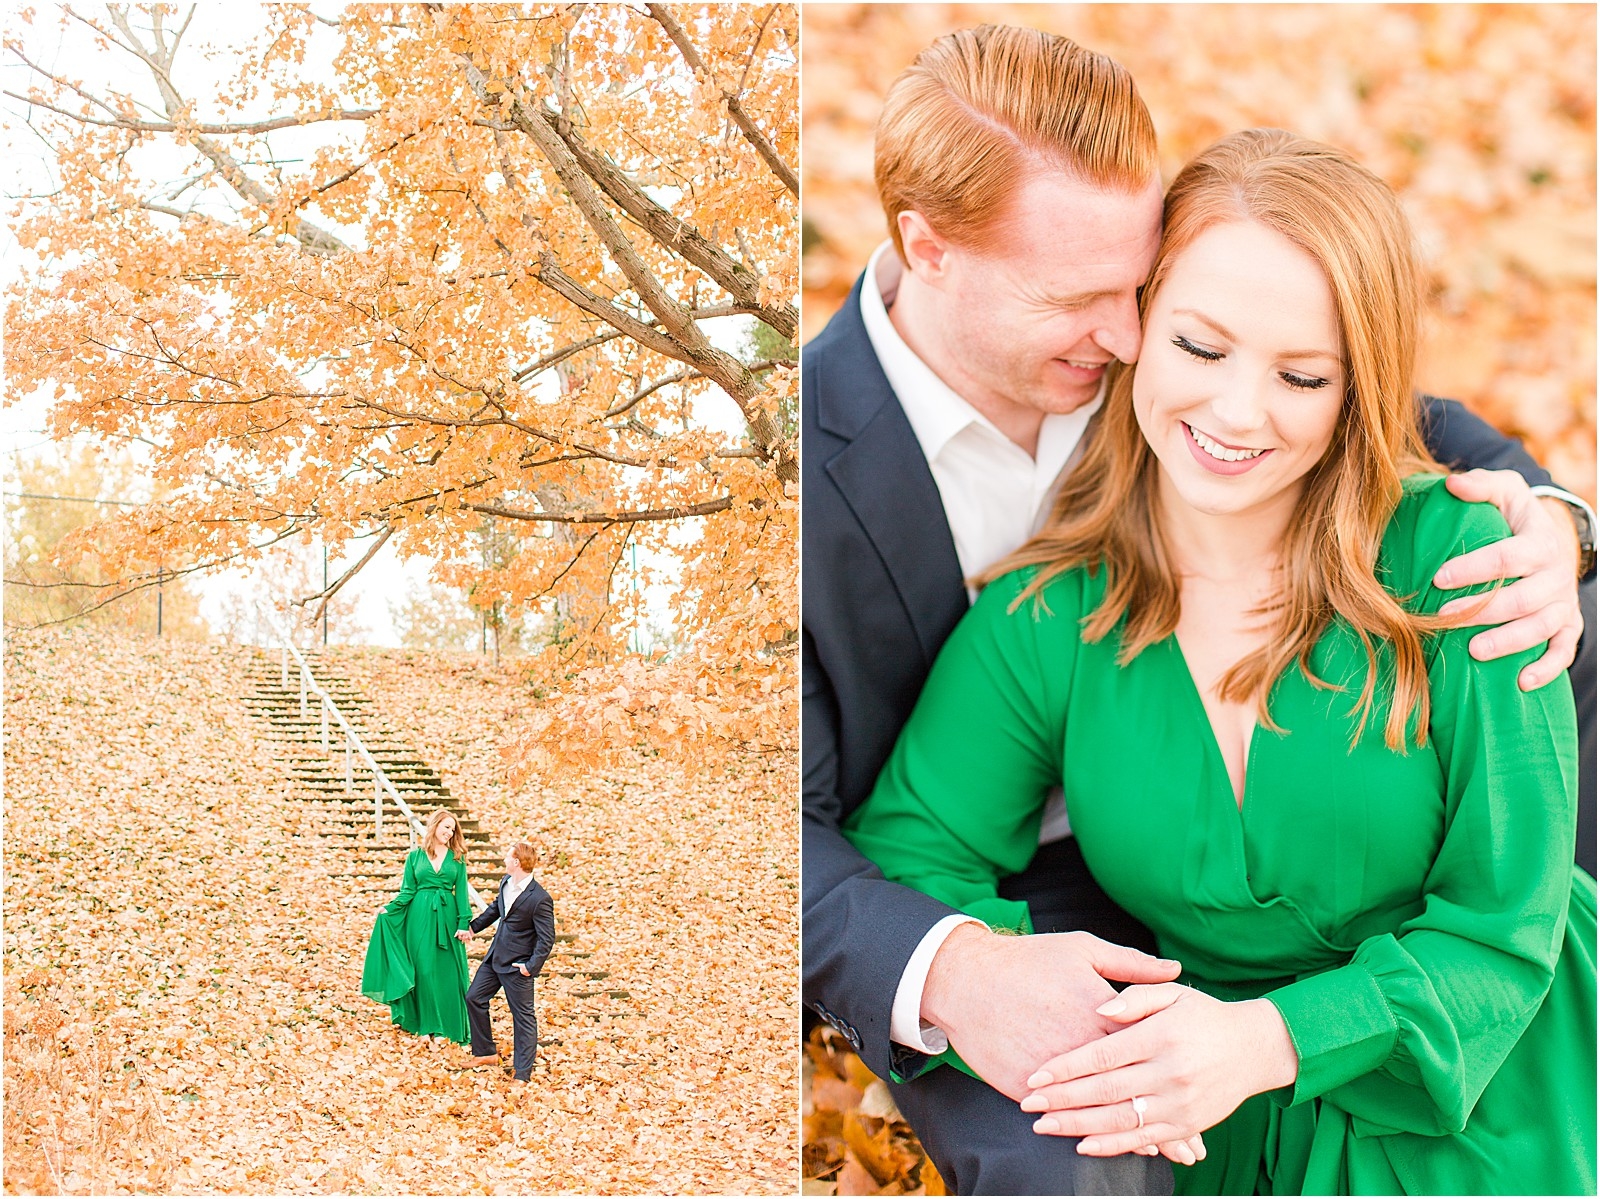 A Mesker Park Zoo Engagement Session | Jennah and Steve | Bret and Brandie Photography019.jpg